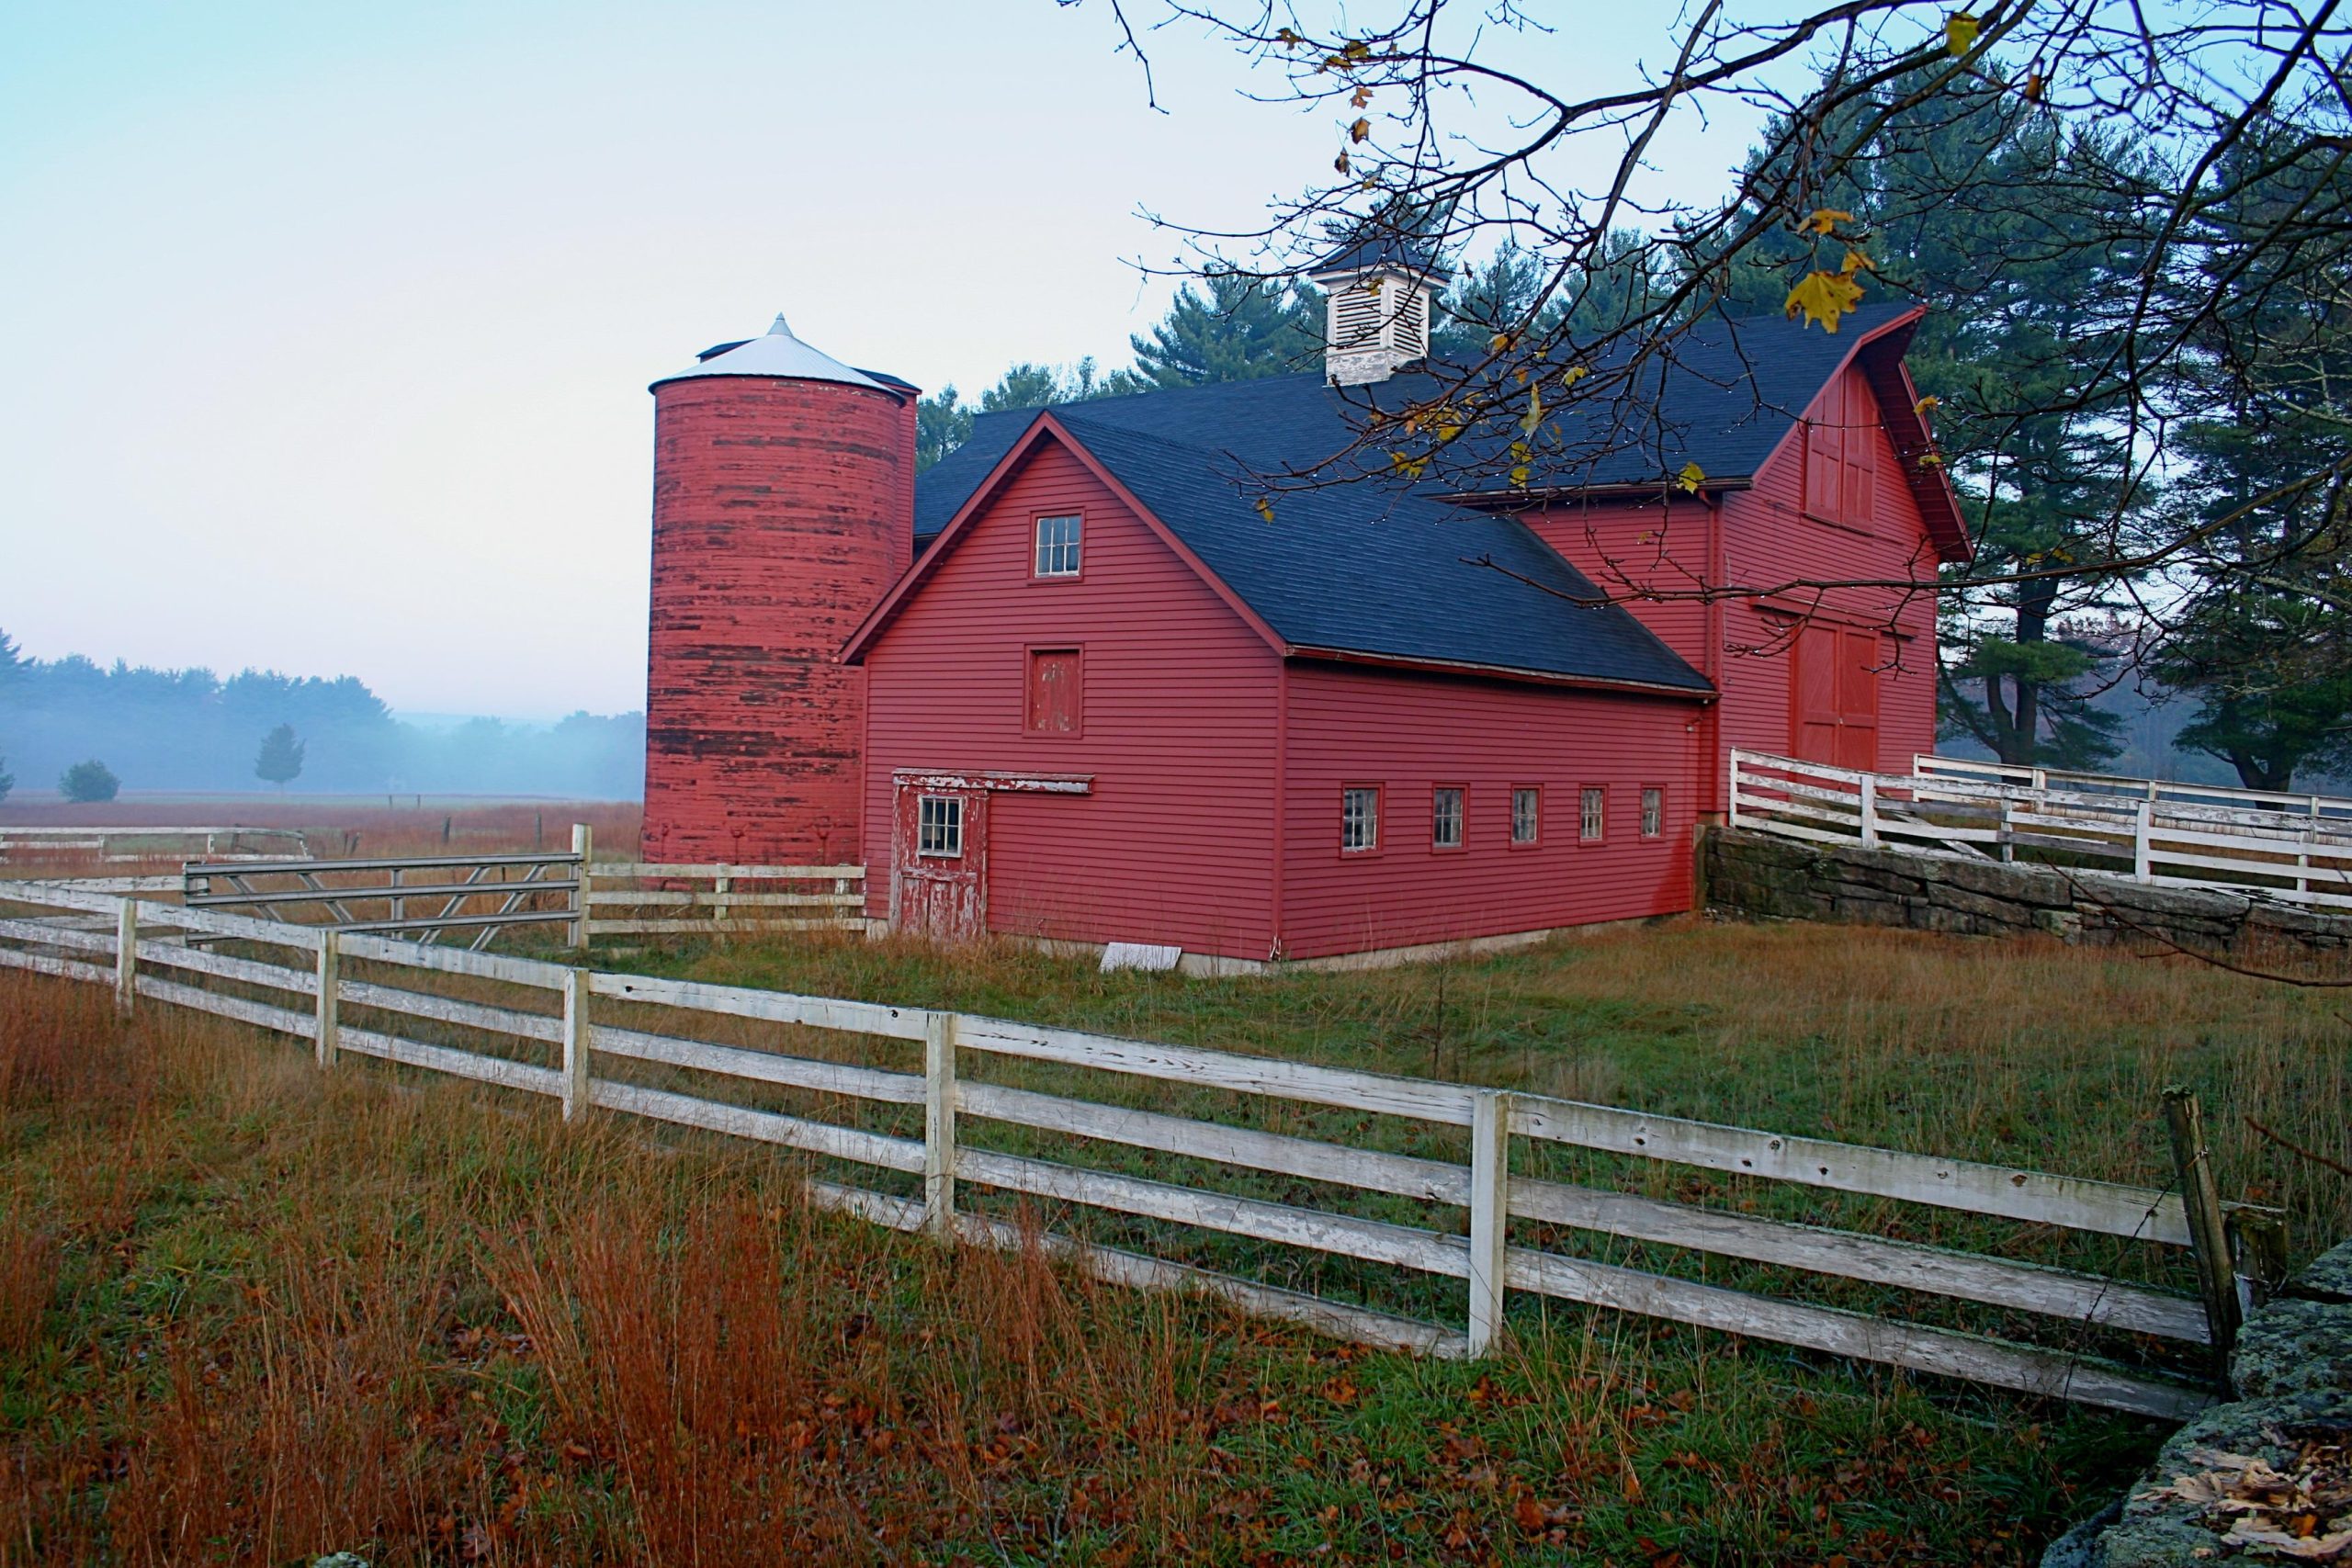 Morning Dew On Barn In W. Greenwich, Rhode Island (user submitted)